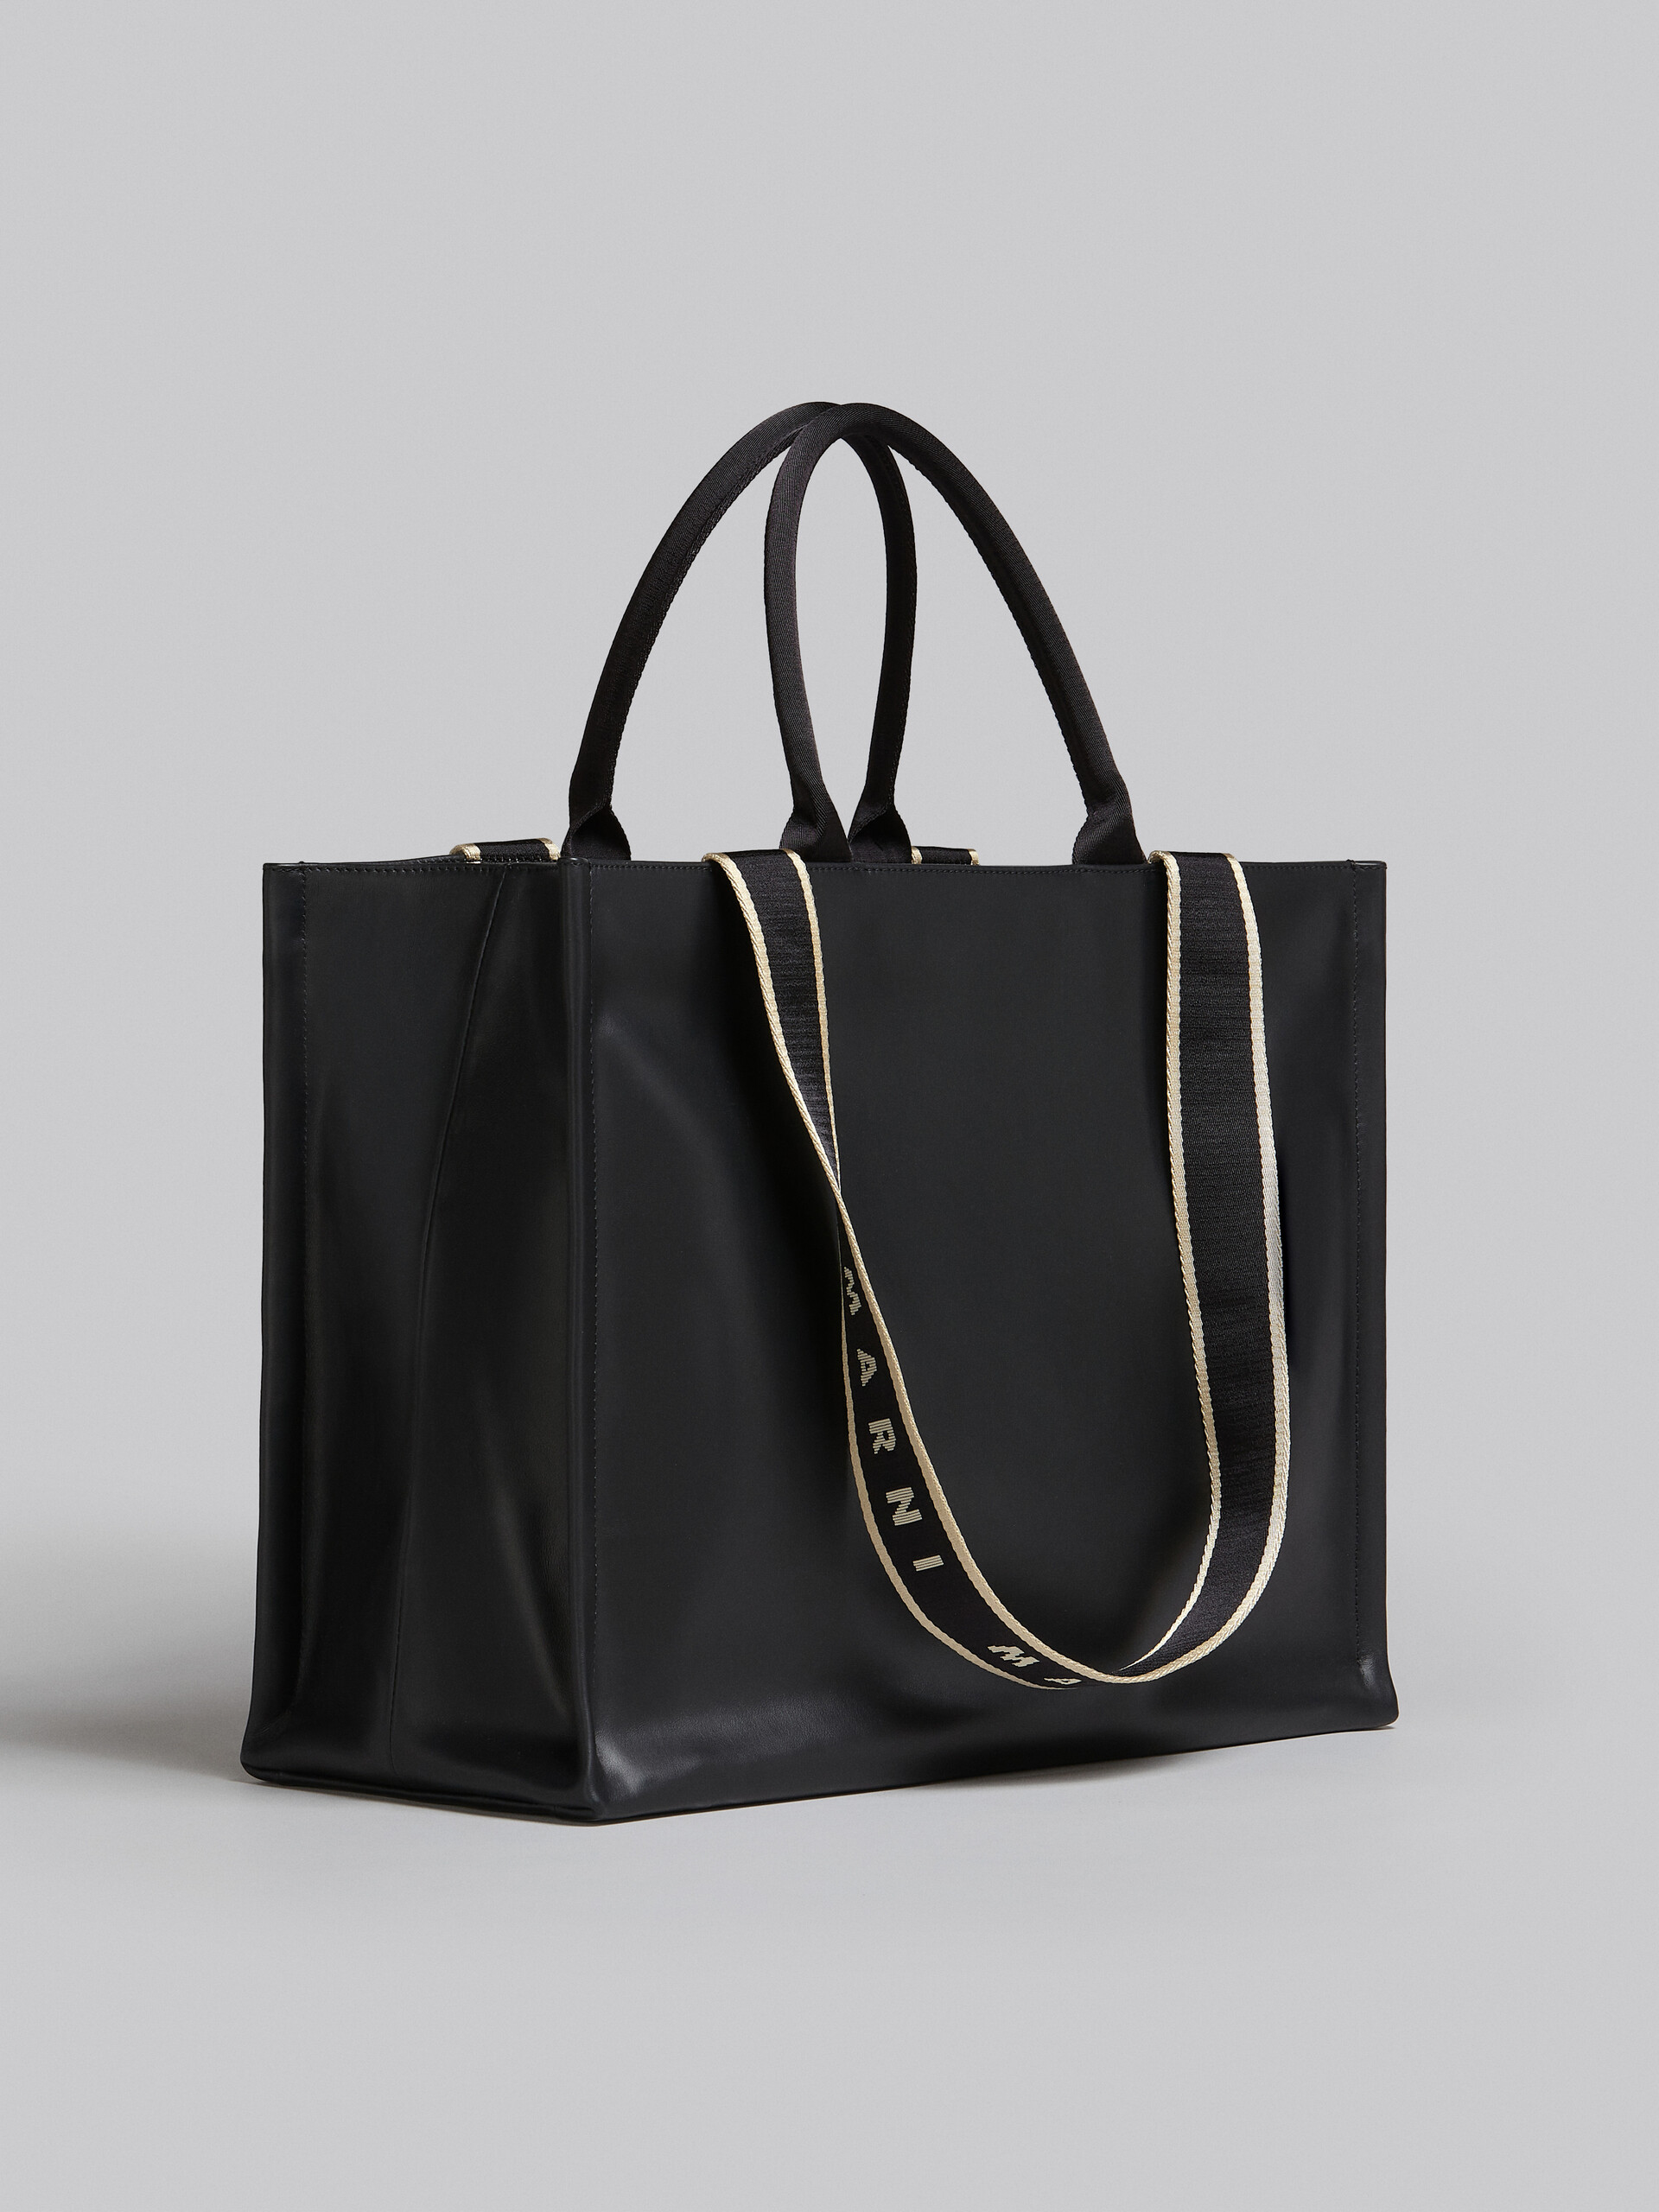 Bey Tote Bag in black leather - Shopping Bags - Image 5